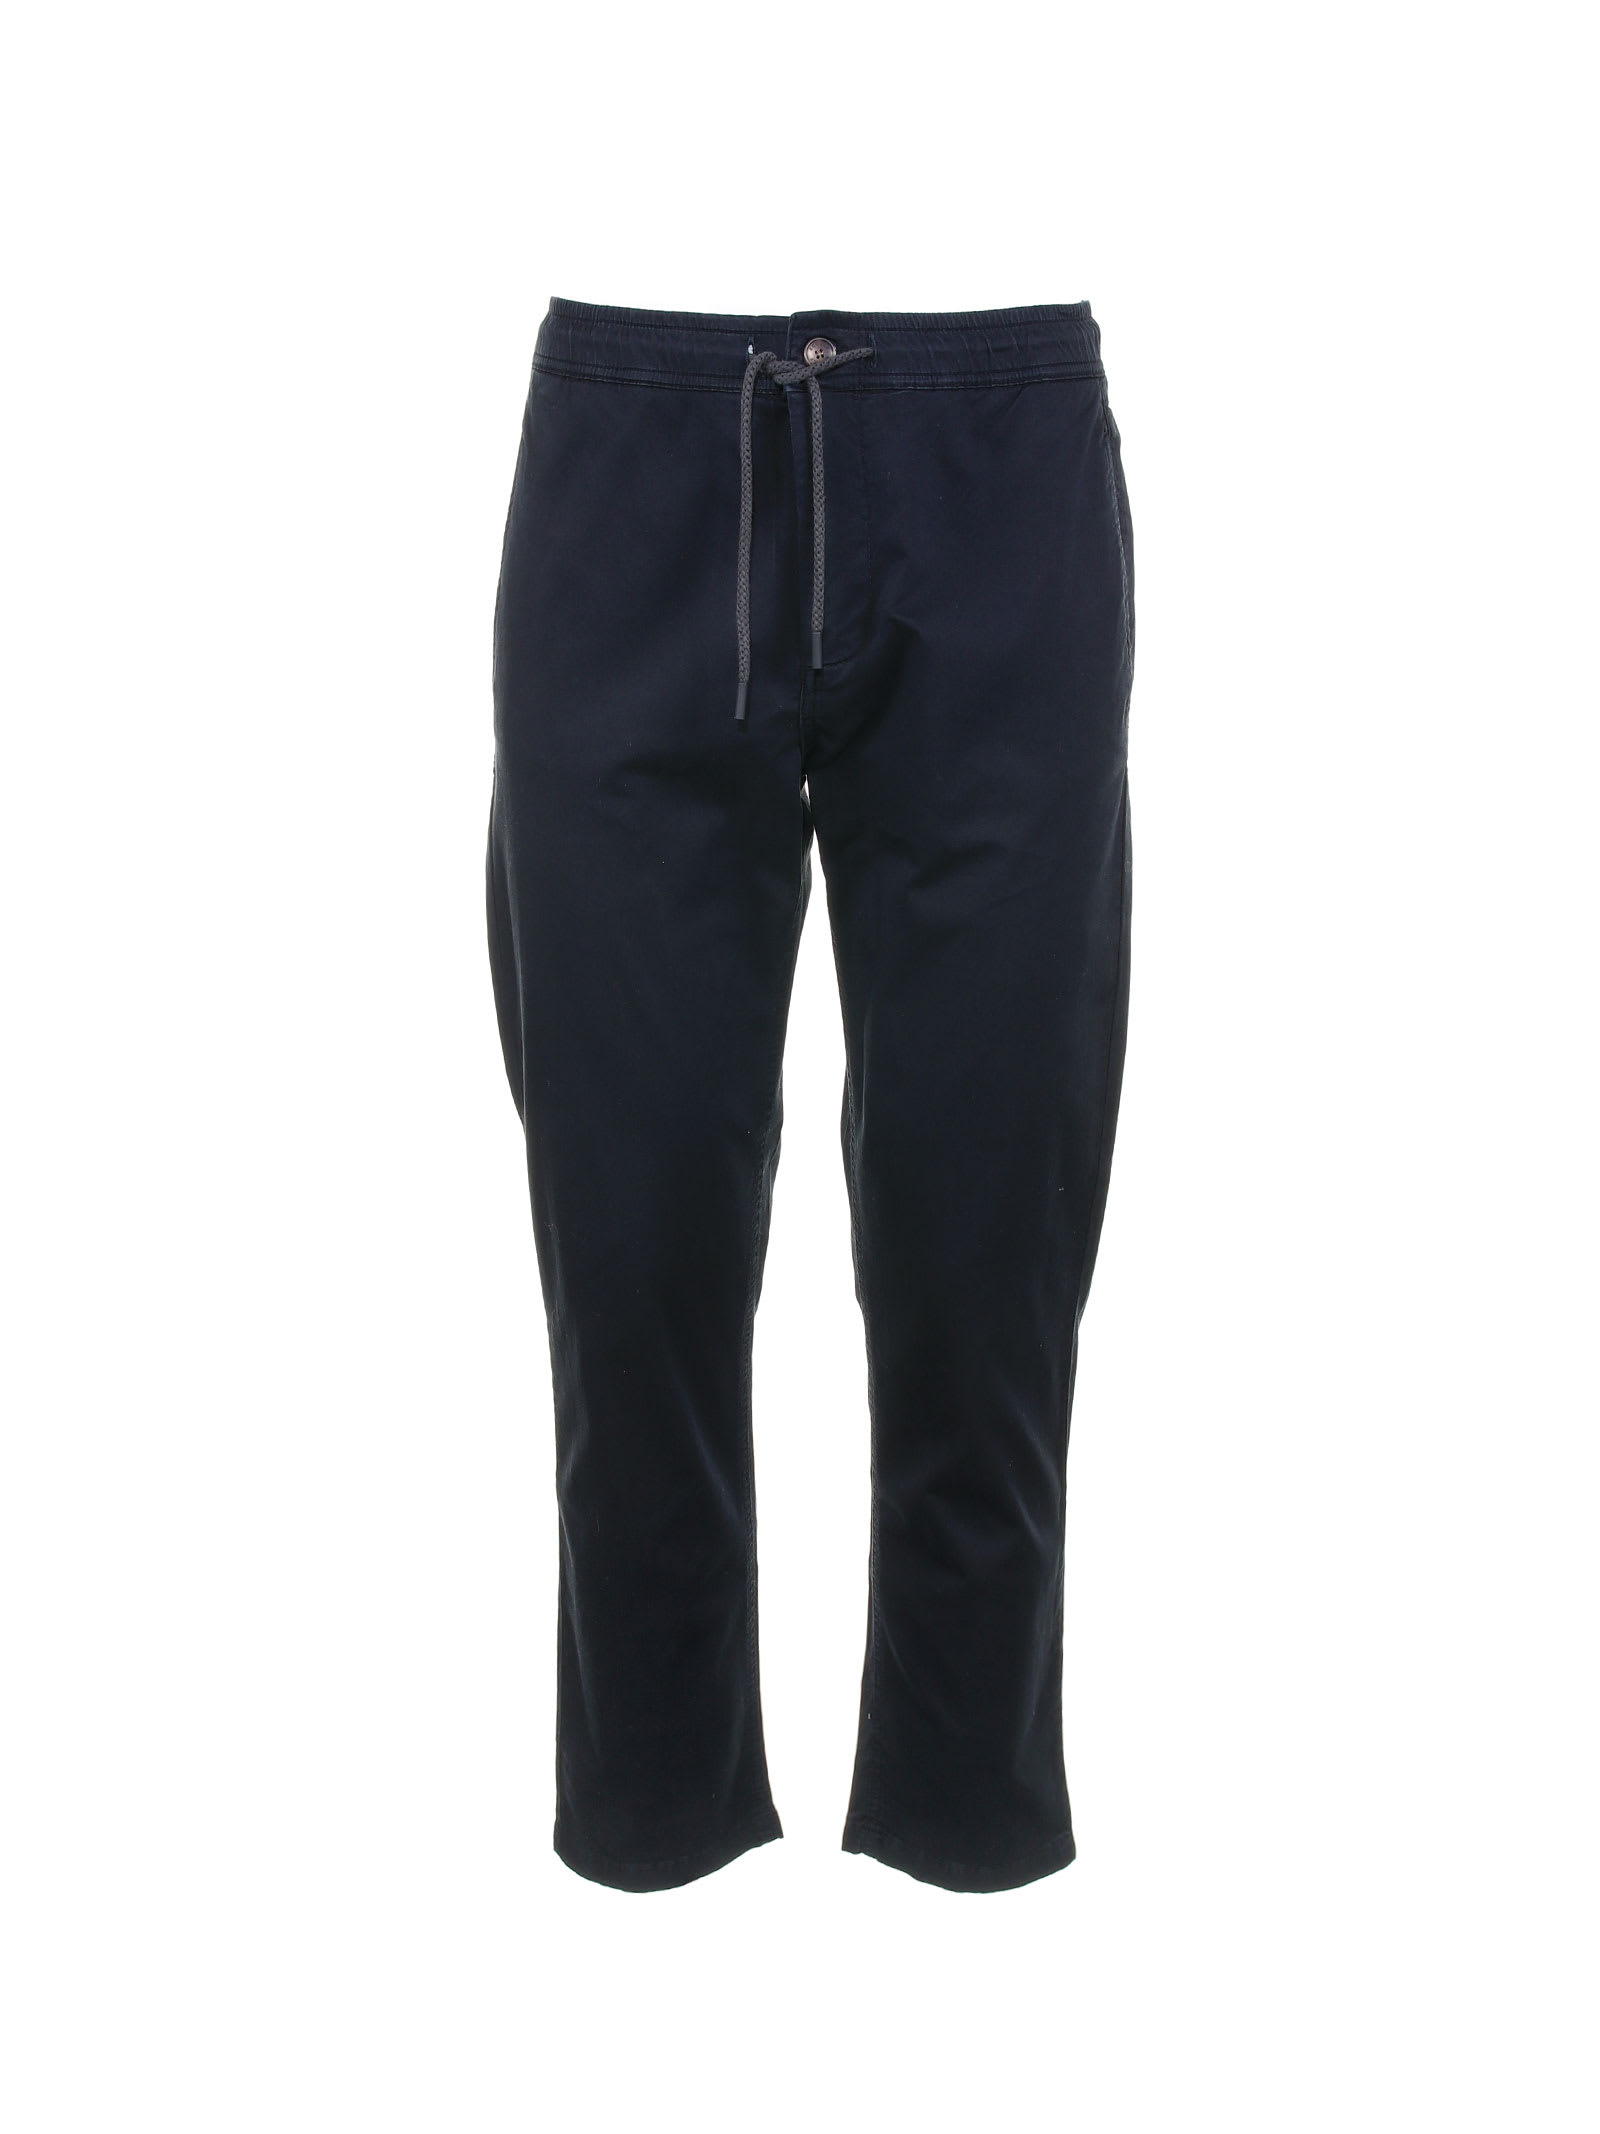 Ecoalf Trousers With Drawstring At The Waist